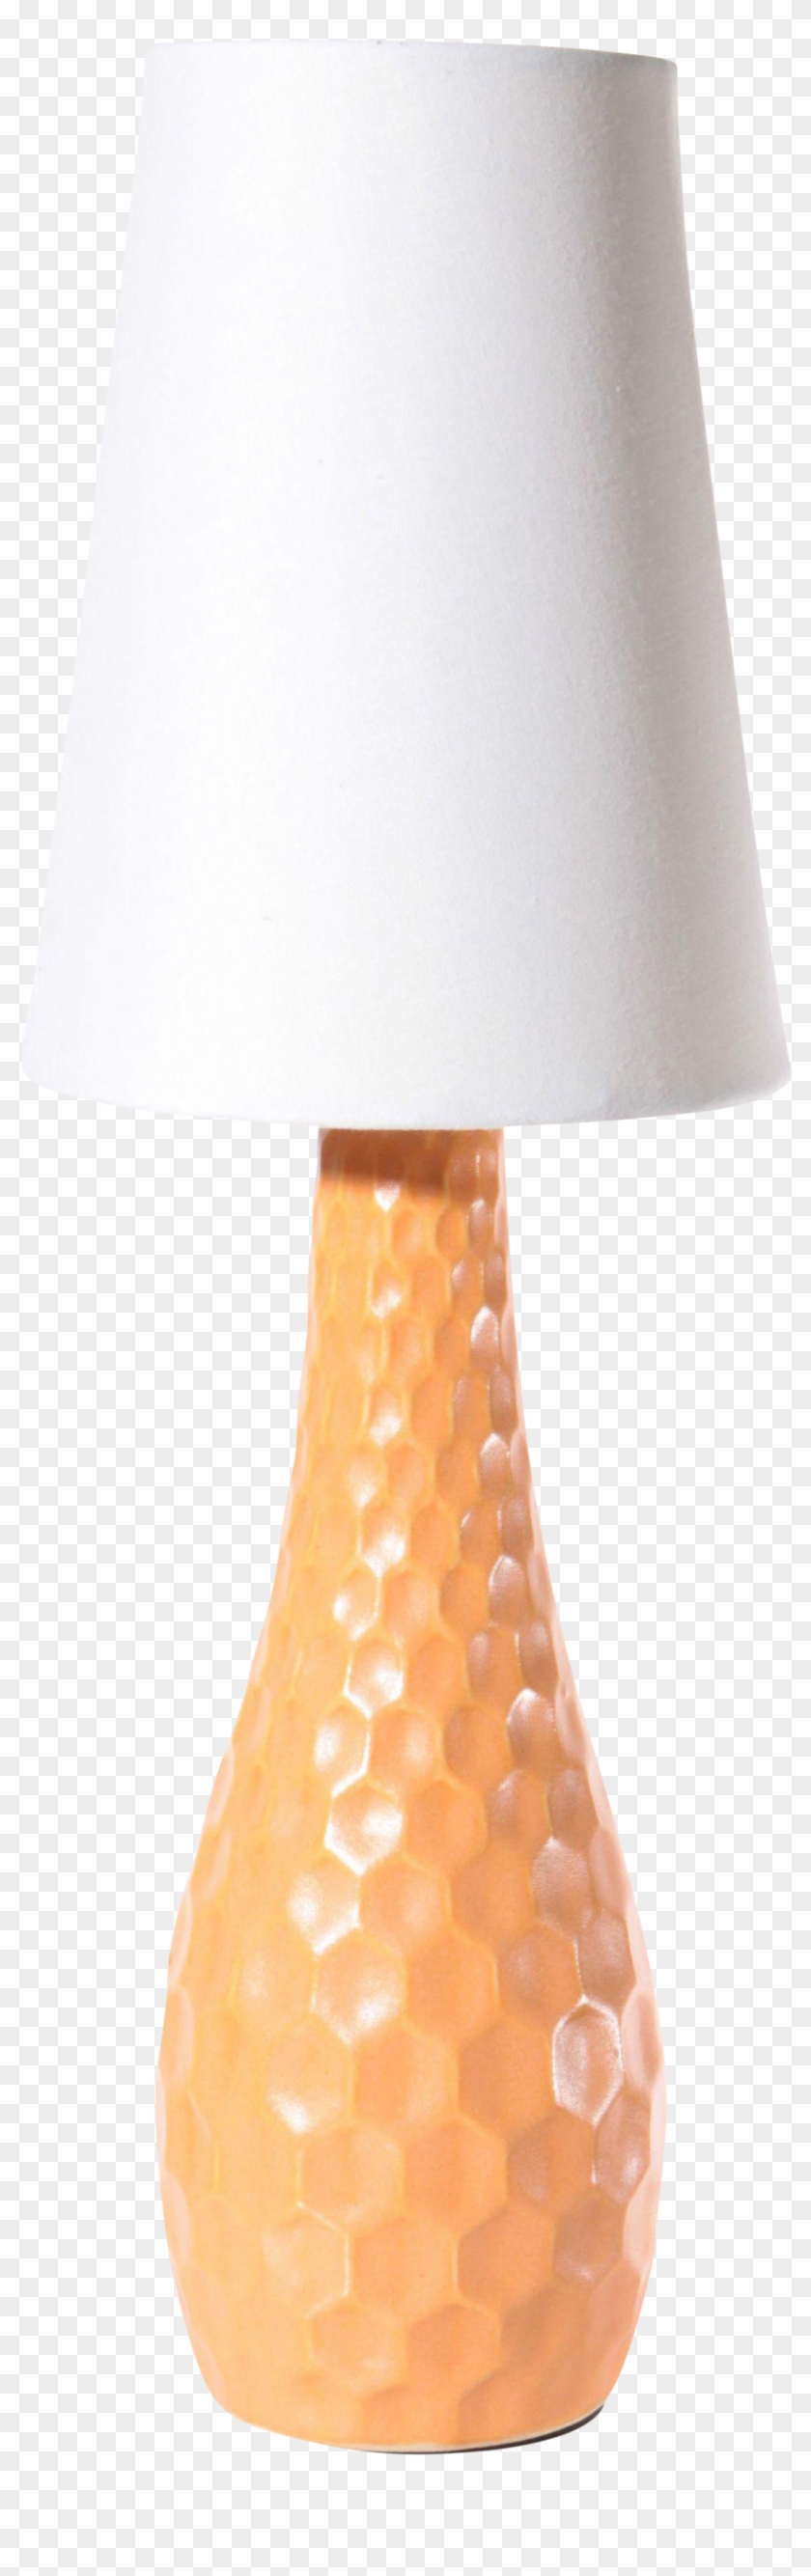 Hurry Honeycomb Lamp White Table Base From Honeycomb - Lampshade #1077887